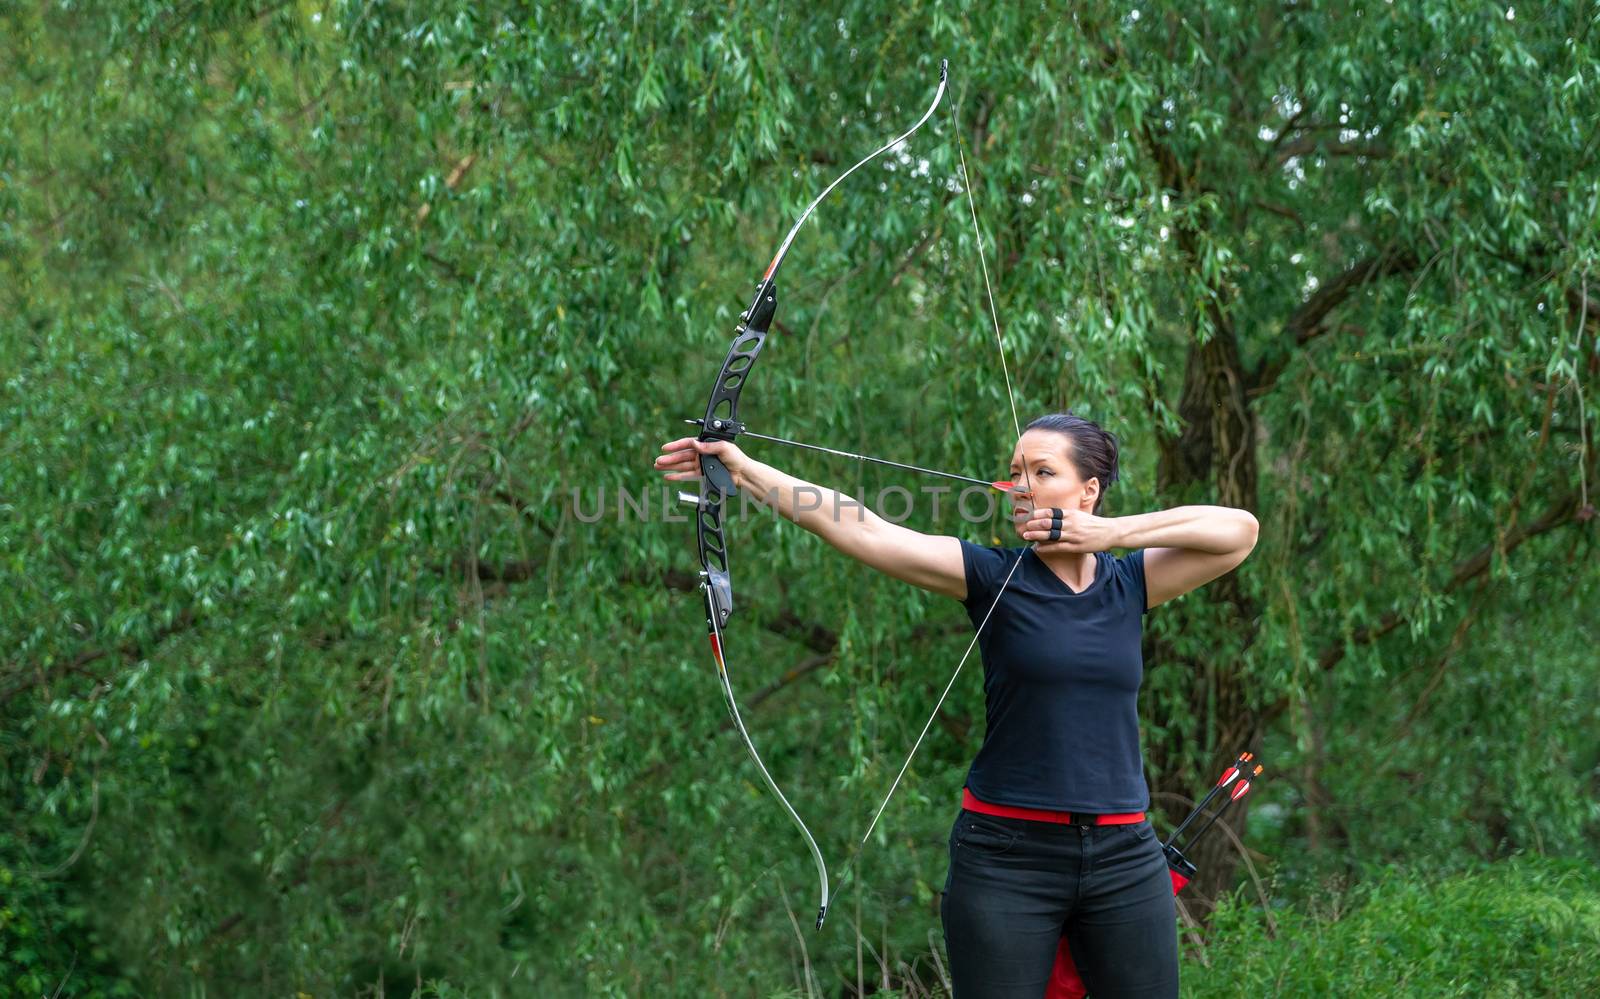 arrow shooting from a bow in nature, sport archery. copy space by Edophoto